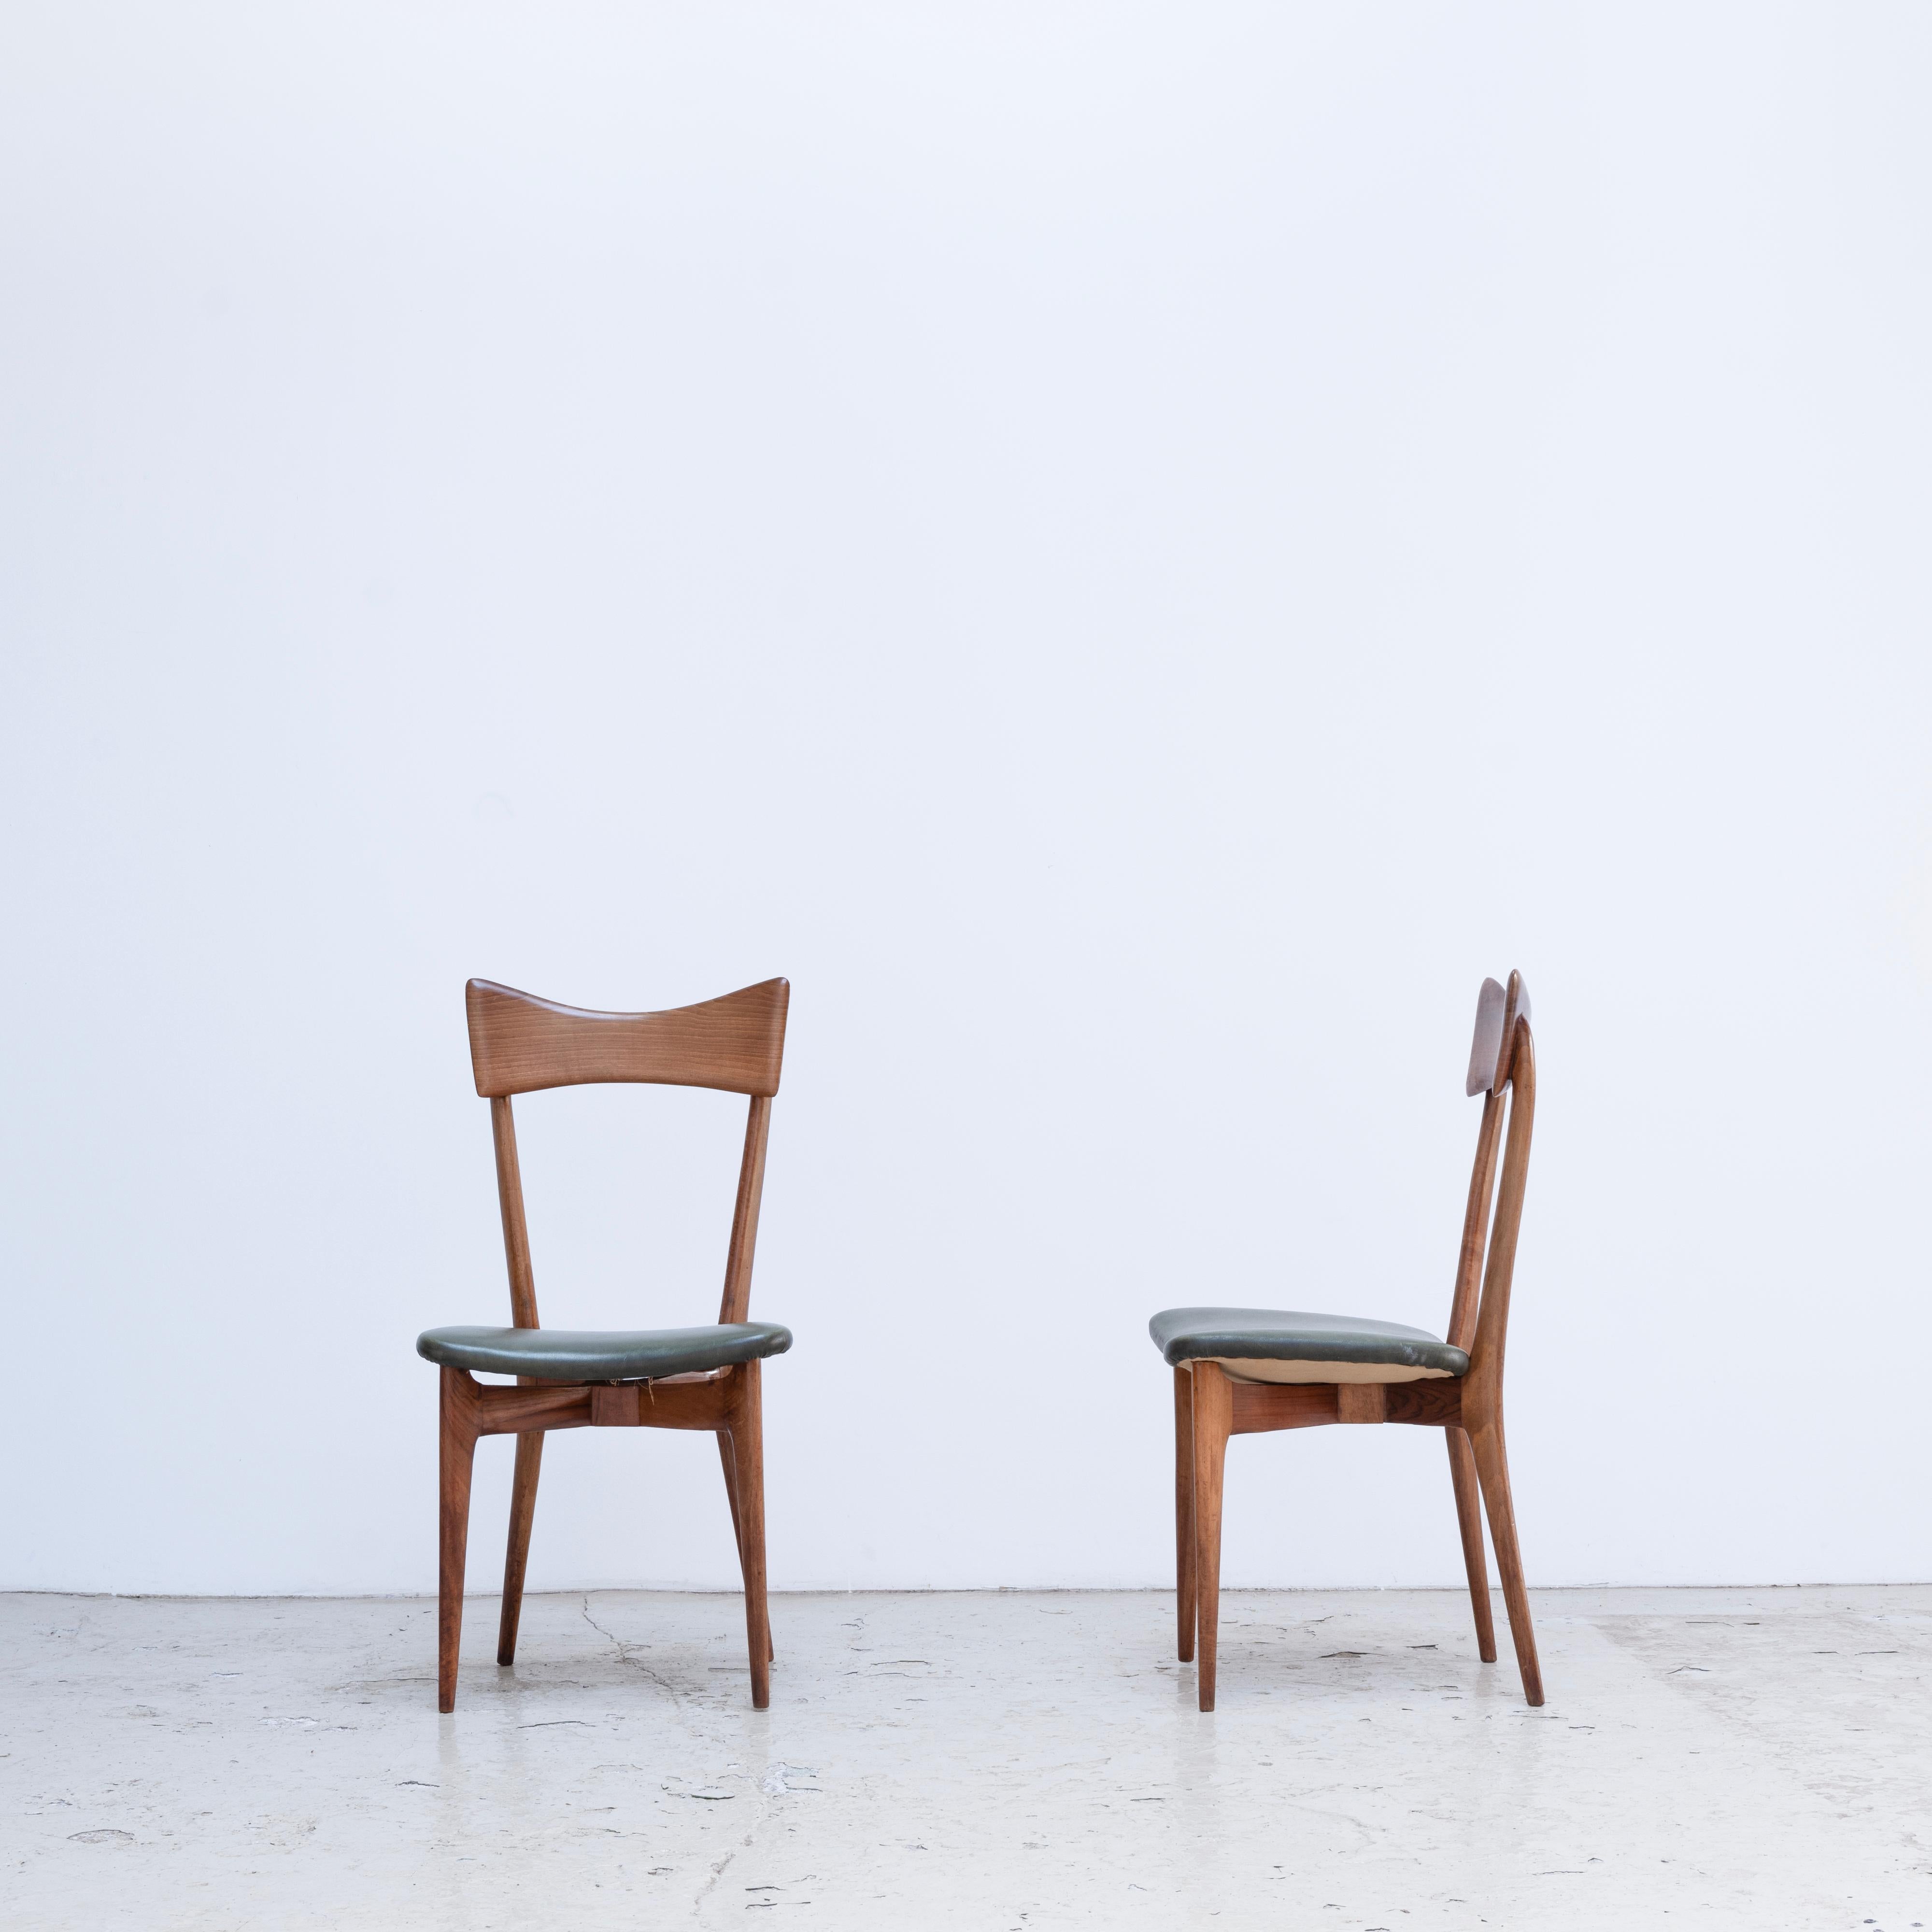 Walnut Italian Dining Chairs by Ico Parisi and Luisa Parisi for Ariberto Colombo, 1950s For Sale